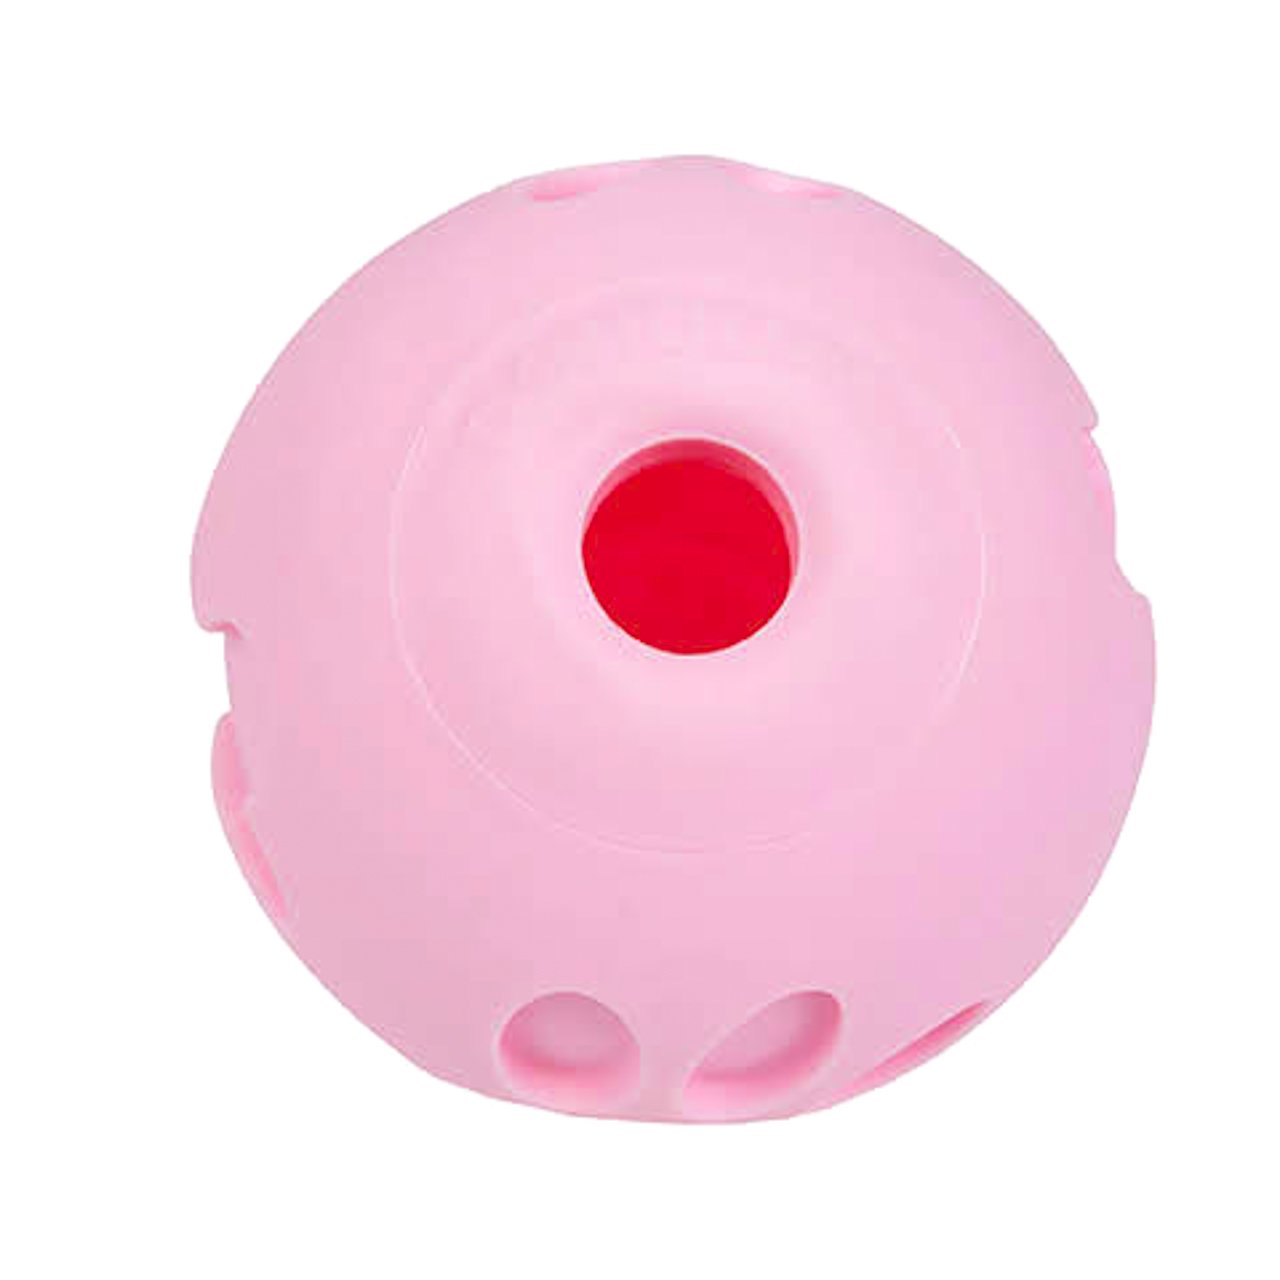 ETHICAL PET Dura Brite Treat Dispenser Ball Dog Toy, Color Varies 